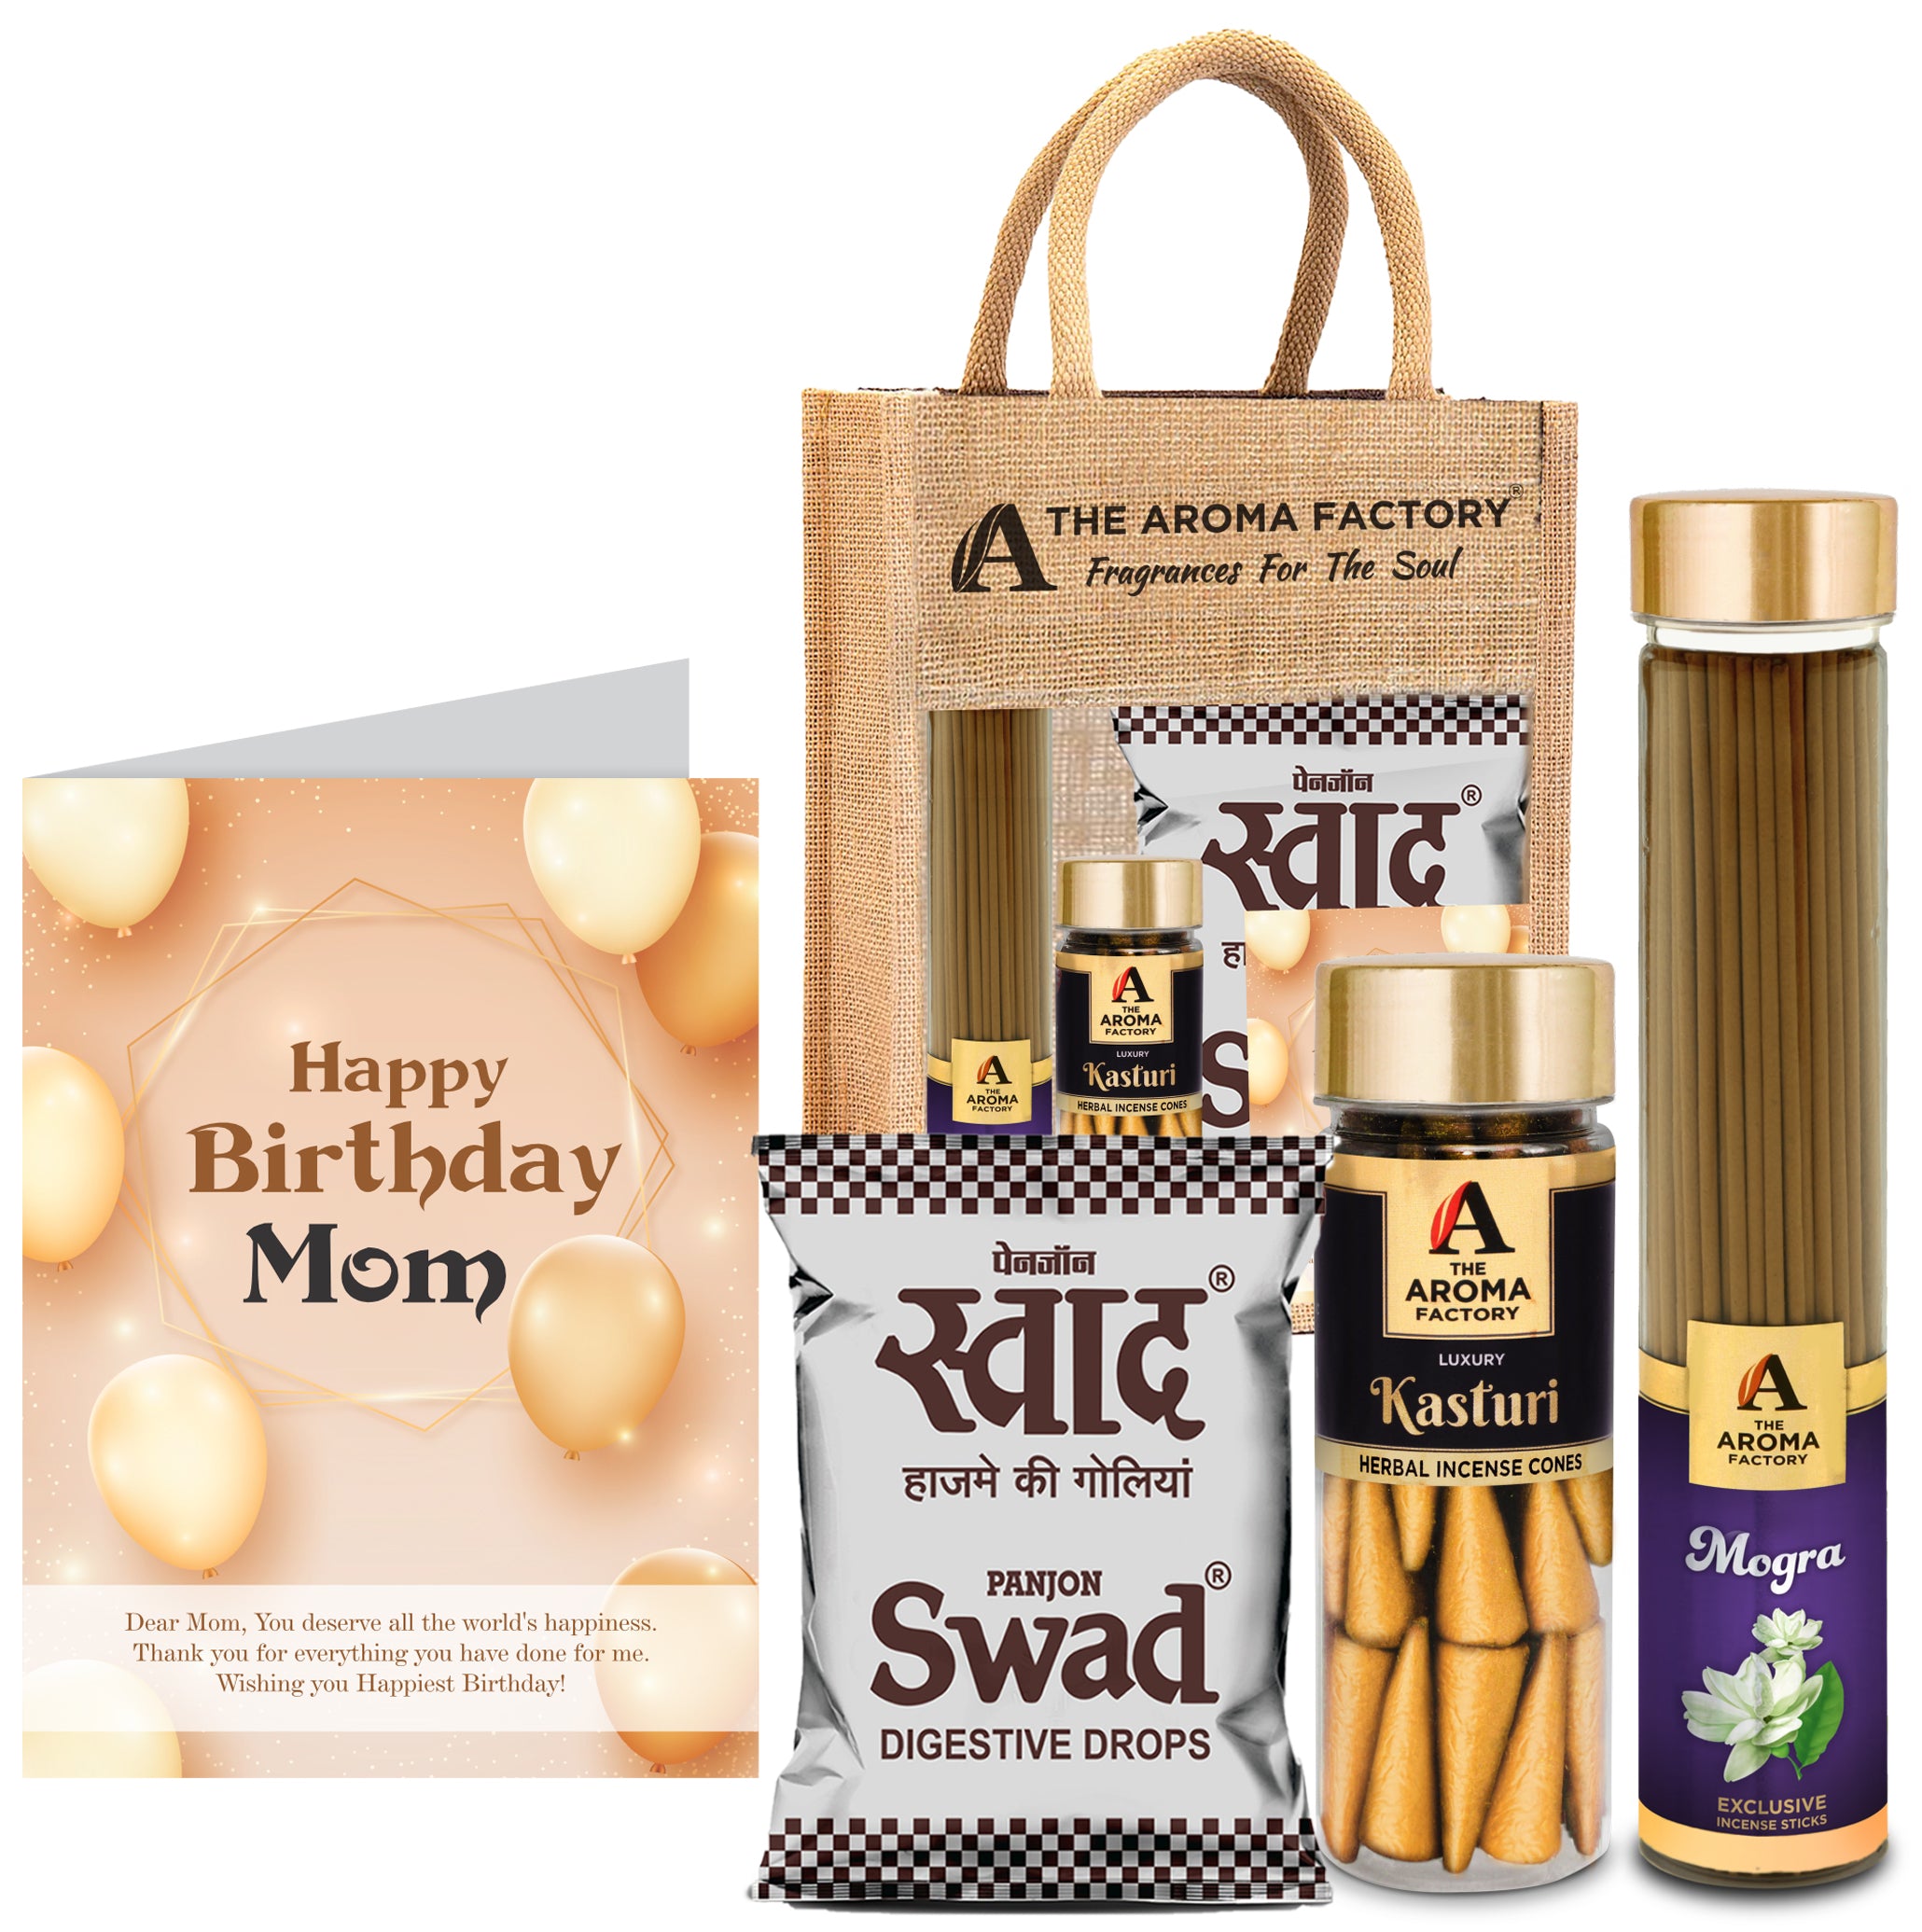 The Aroma Factory Happy Birthday Mom Mother Gift with Card (25 Swad Candy, Mogra Agarbatti Bottle, Kasturi Cone) in Jute Bag